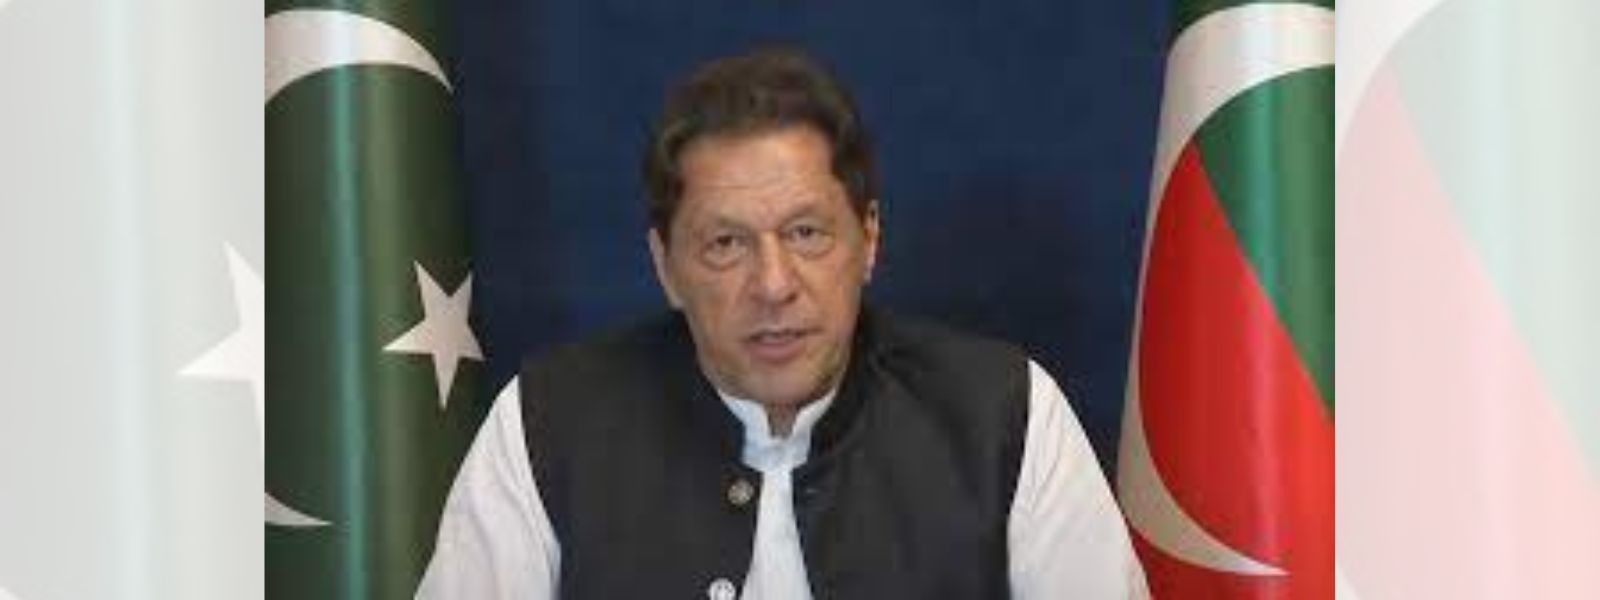 Imran Khan: Latest Pakistan ex-PM to be arrested